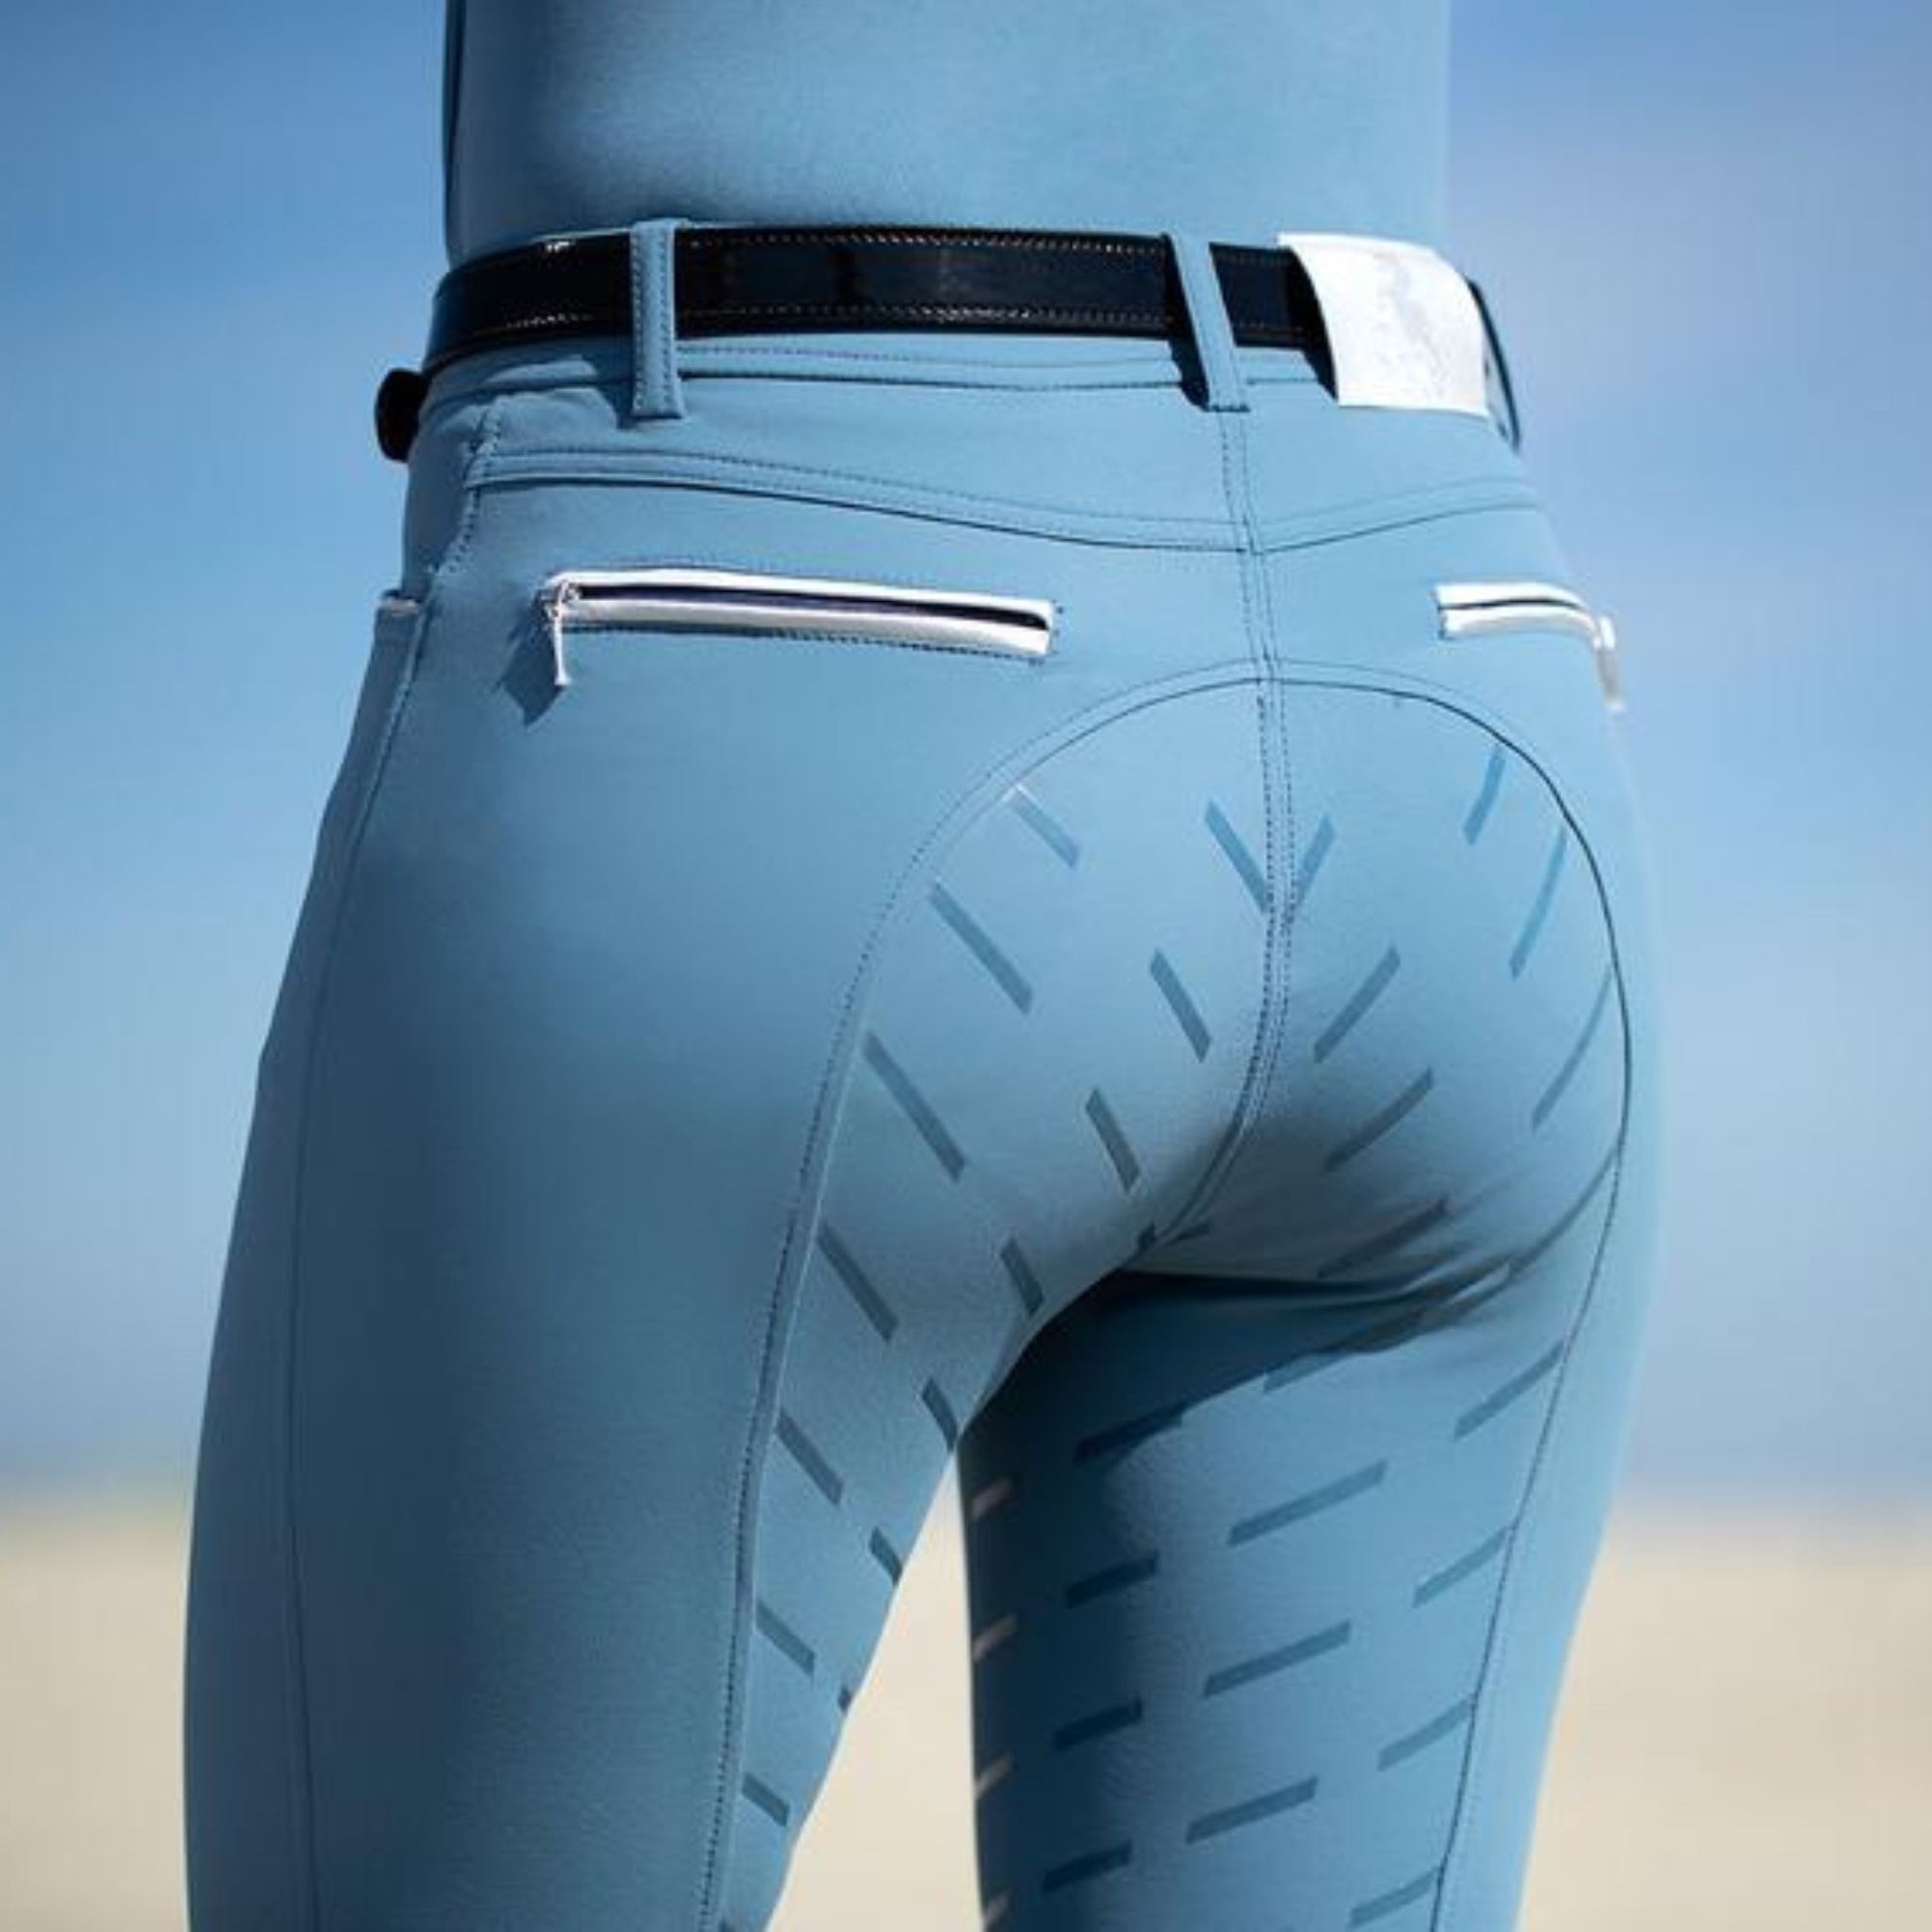 Smokey blue breeches with silicone stripped seat and white back zippers.